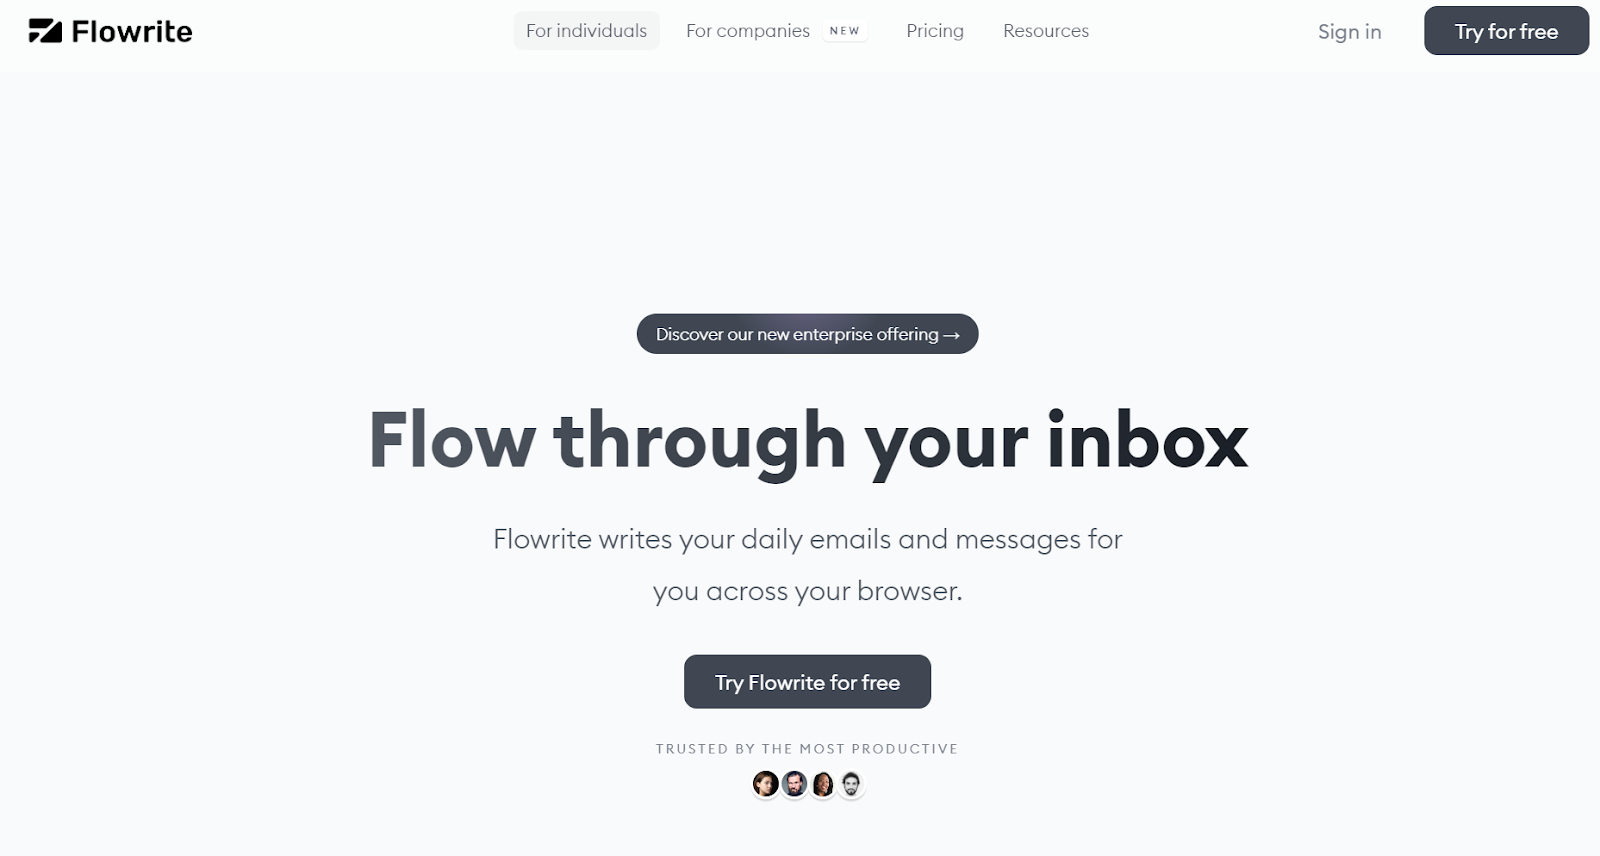 Professional emails and messages - Use Flowrite